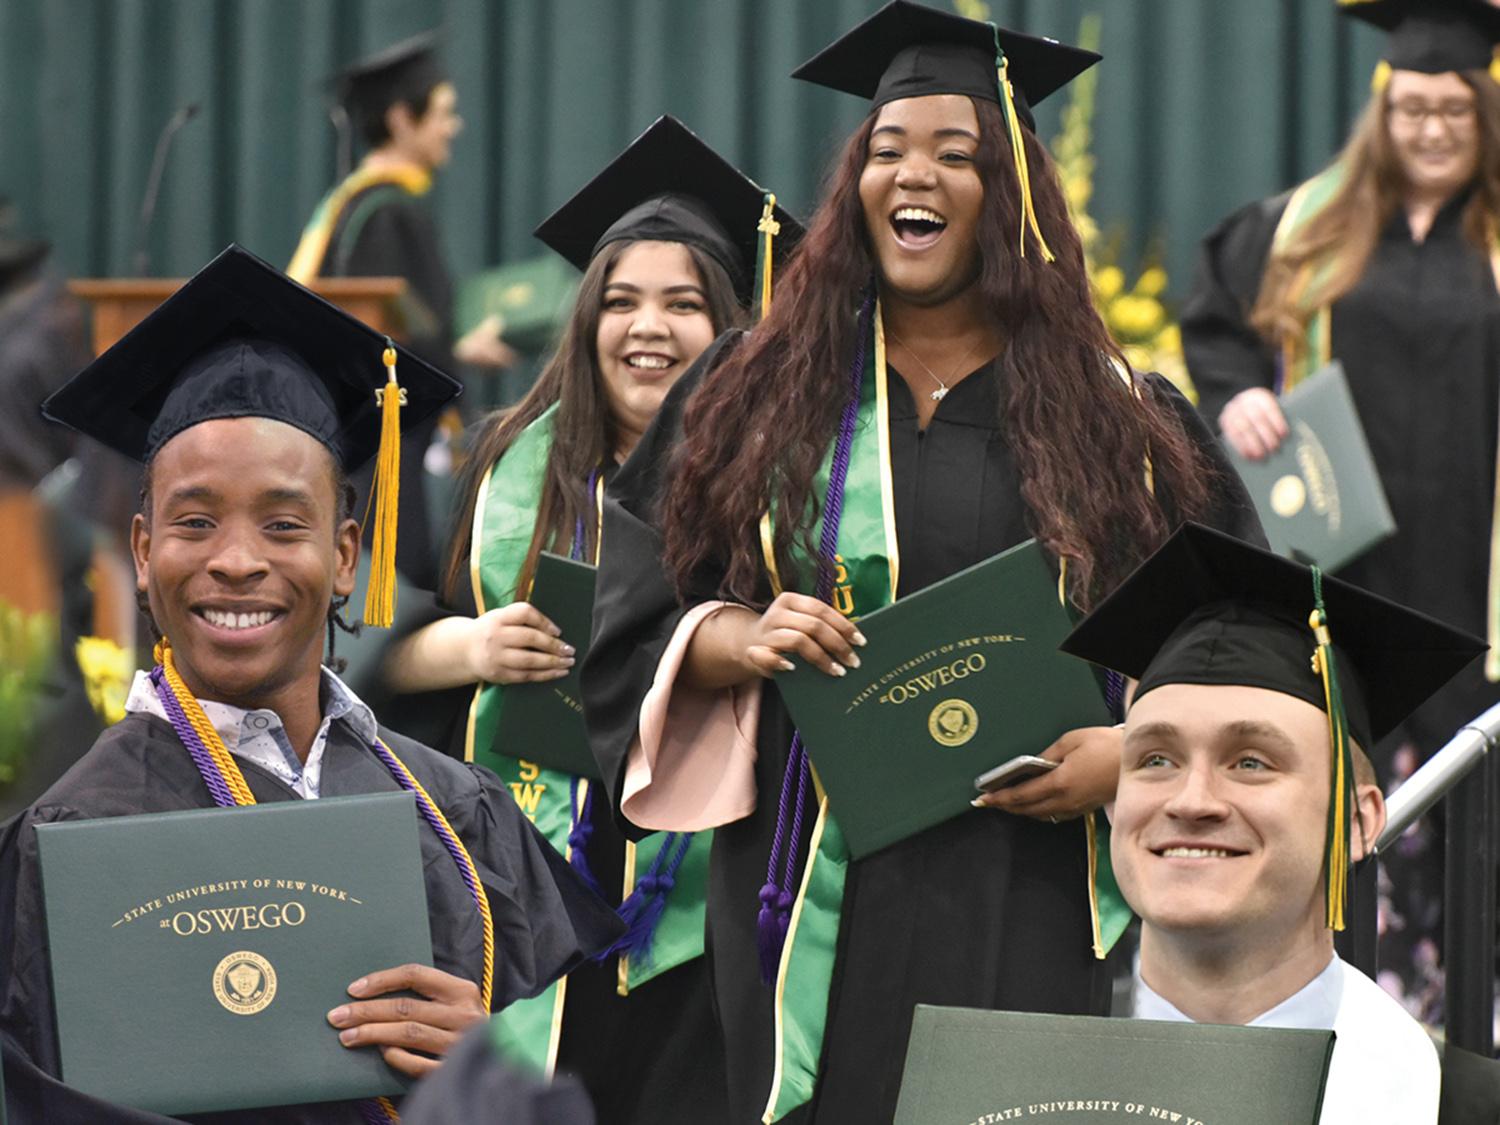 Students celebrate graduating at Commencement